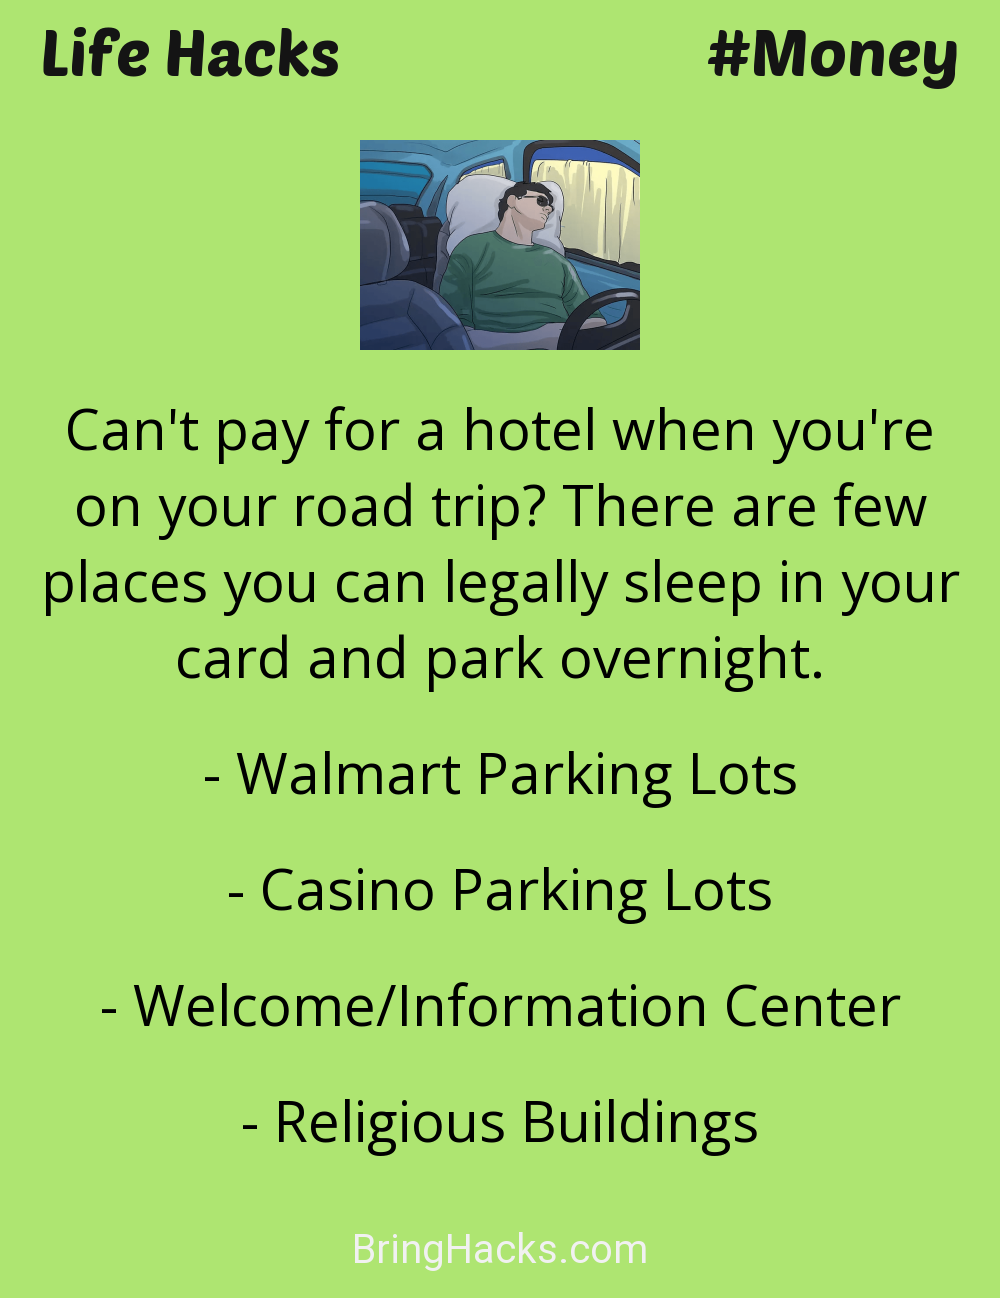 Life Hacks: - Can't pay for a hotel when you're on your road trip? There are few places you can legally sleep in your card and park overnight.
Walmart Parking LotsCasino Parking LotsWelcome/Information CenterReligious Buildings